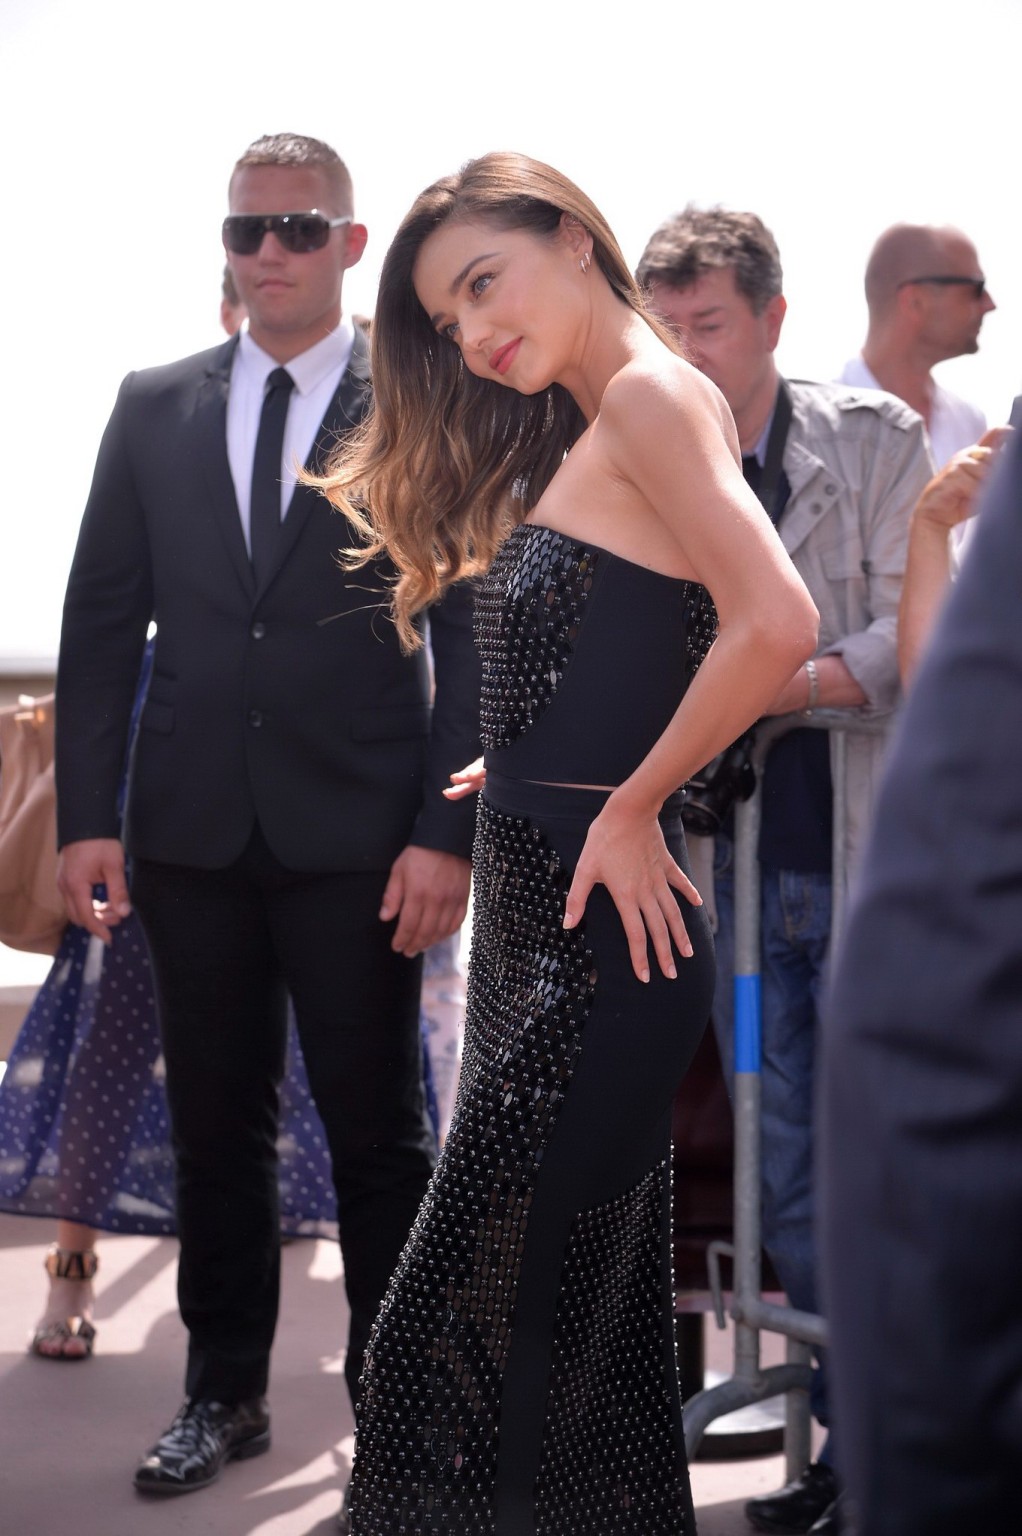 Miranda Kerr upskirt at the Ambassador for Magnum event in Cannes #75164496